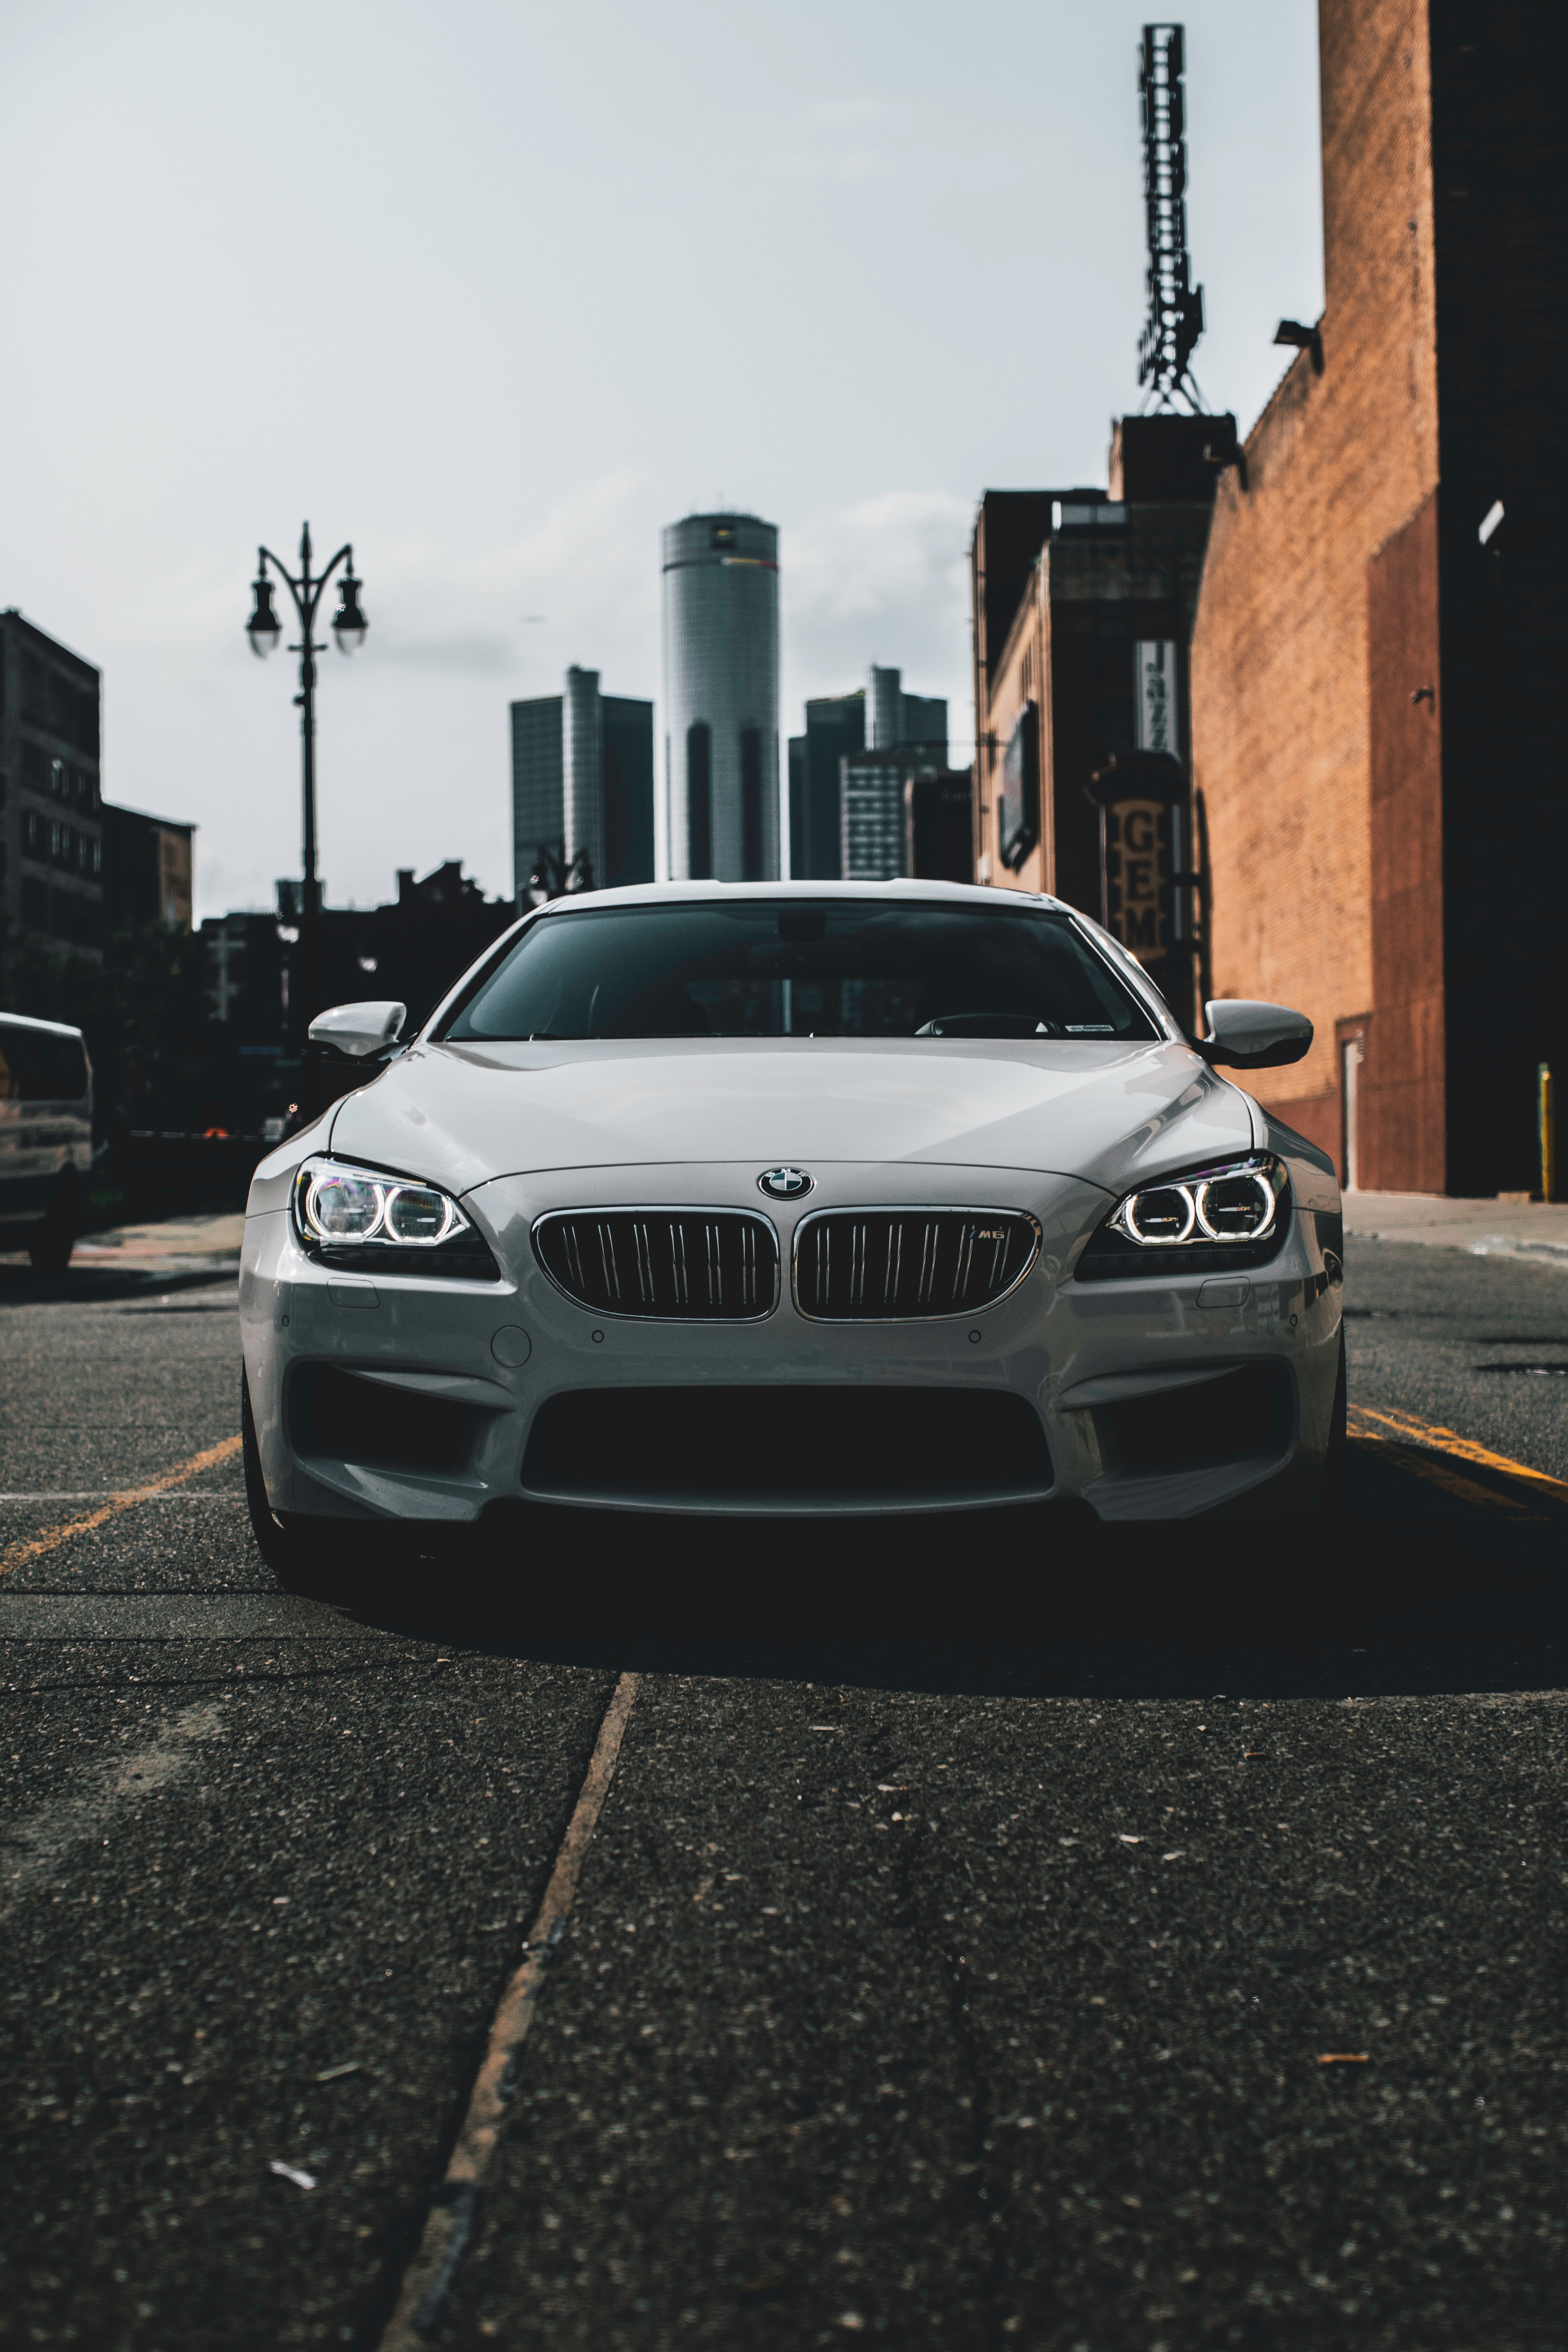 Popular Bmw M6 Image for Phone